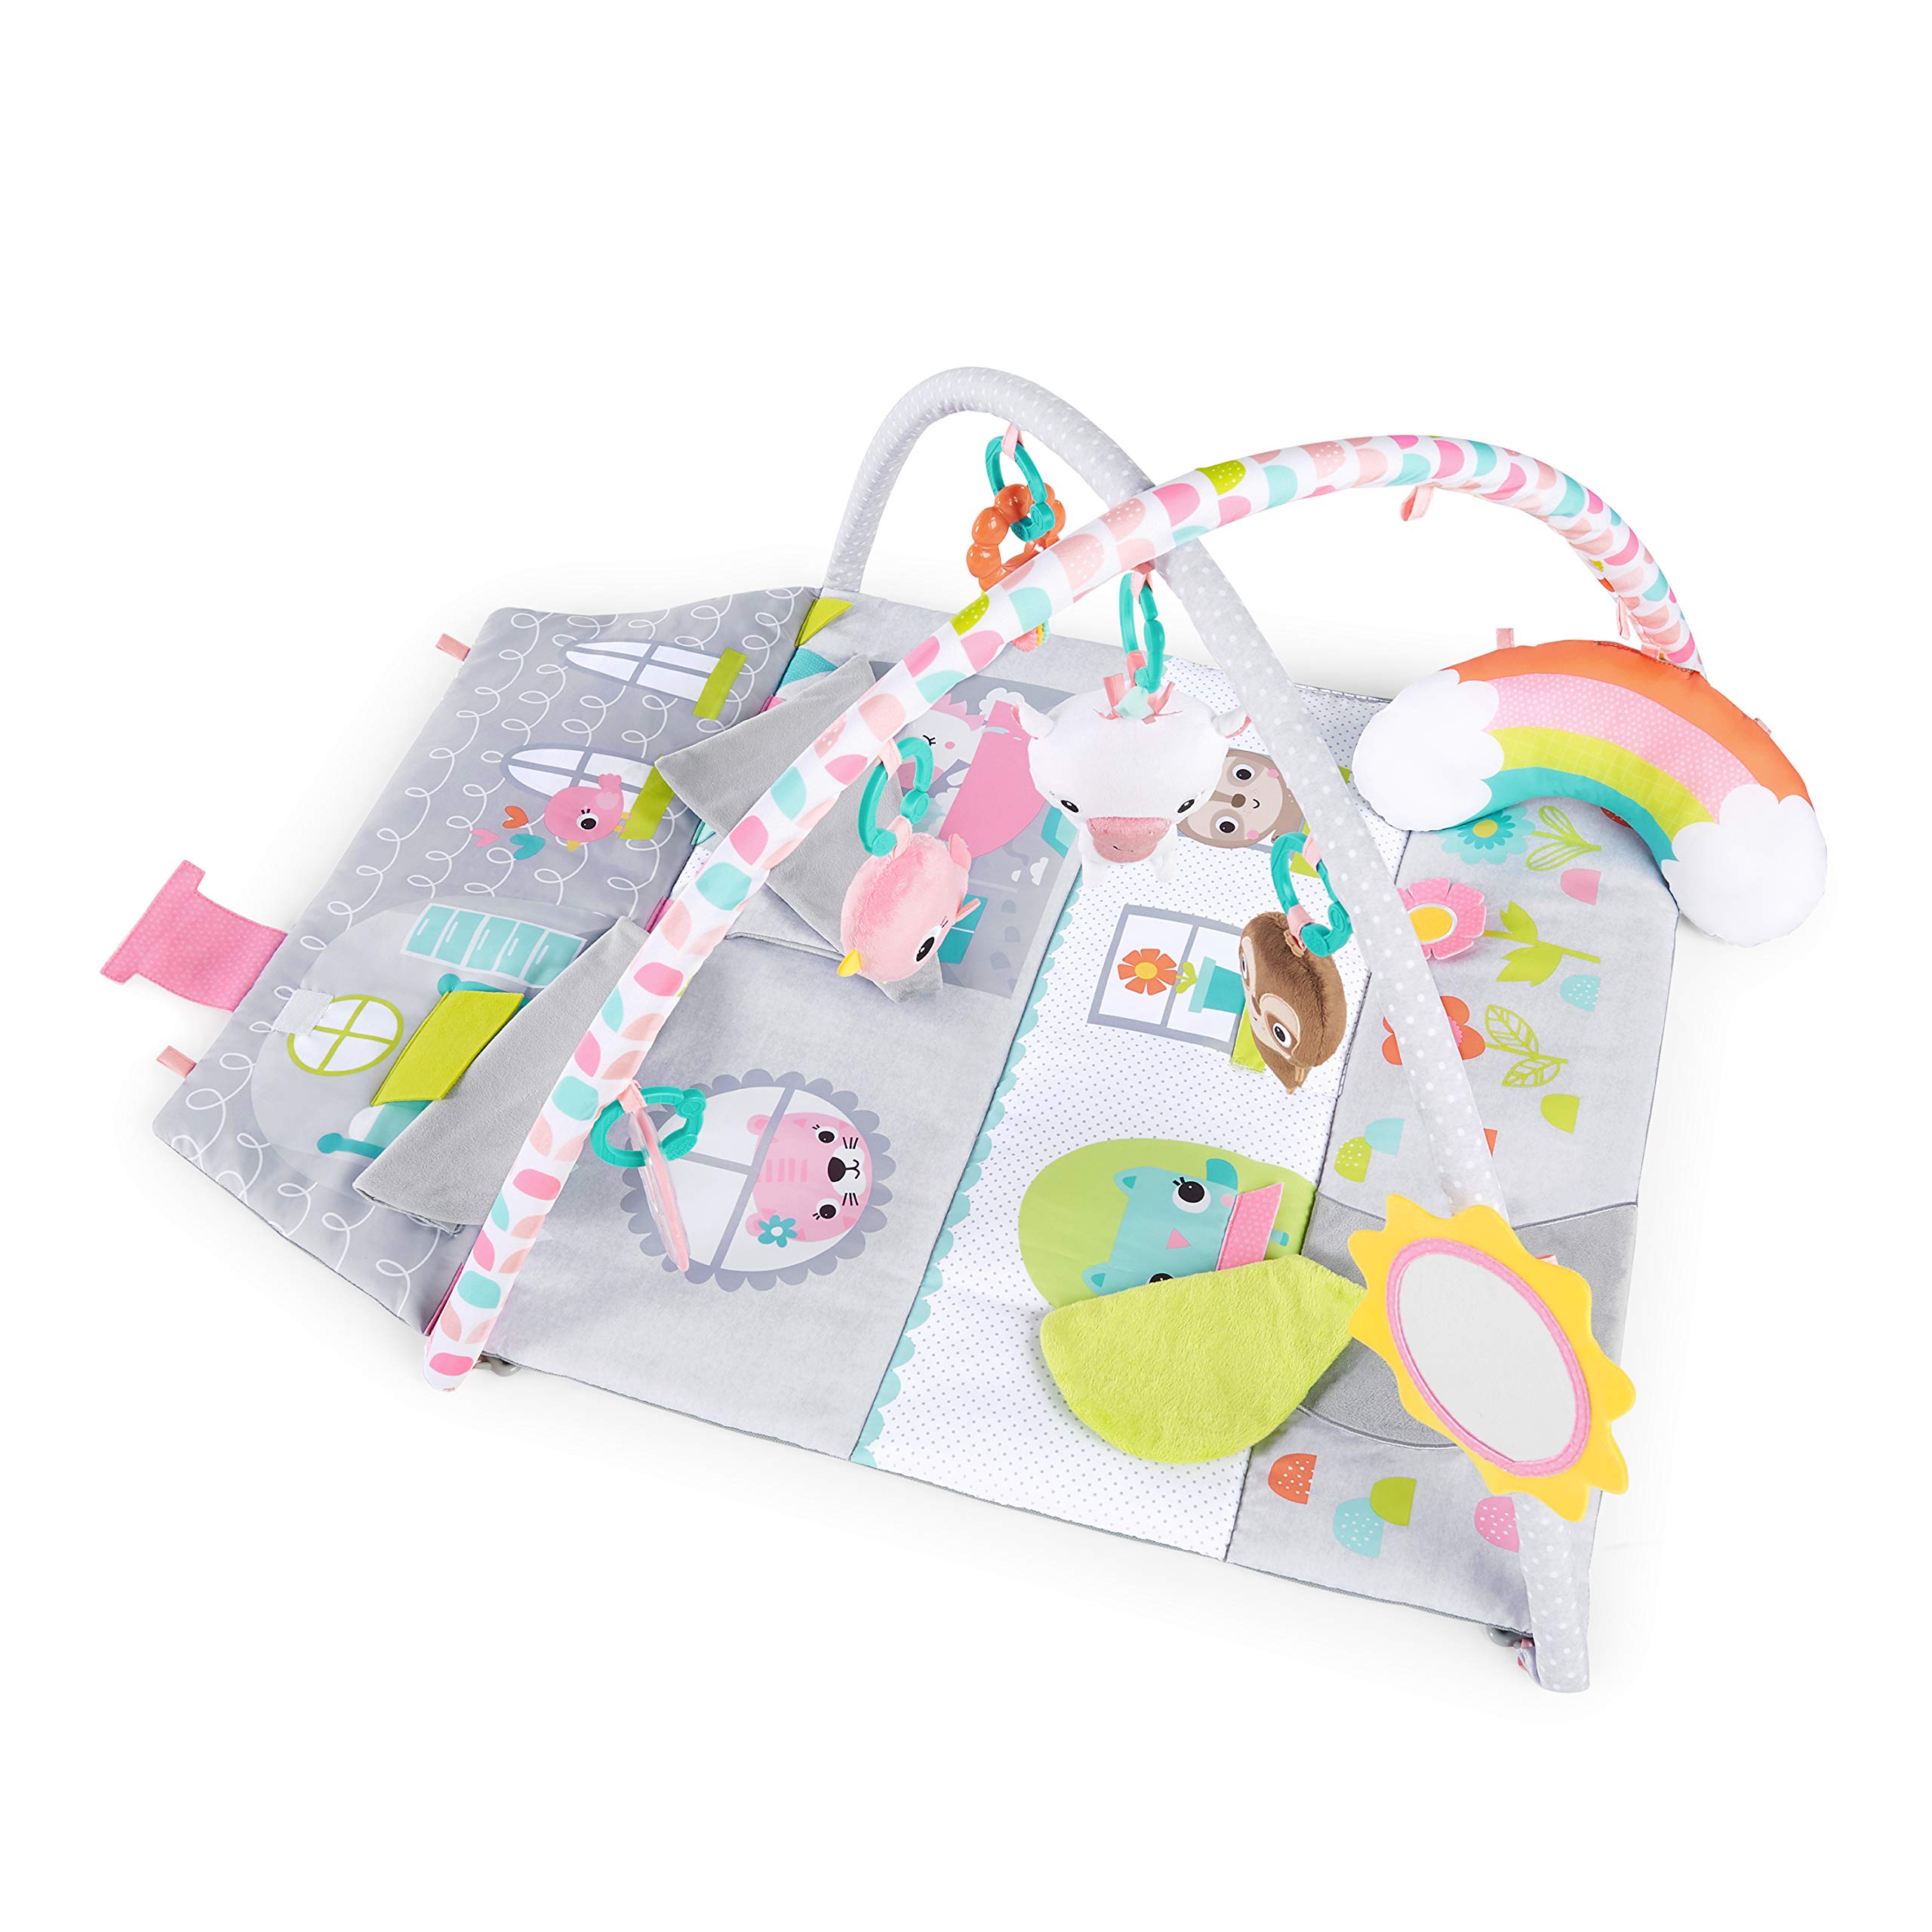 Momobebe Newborn to Toddler Play Gym and Play Mat - Dollhouse